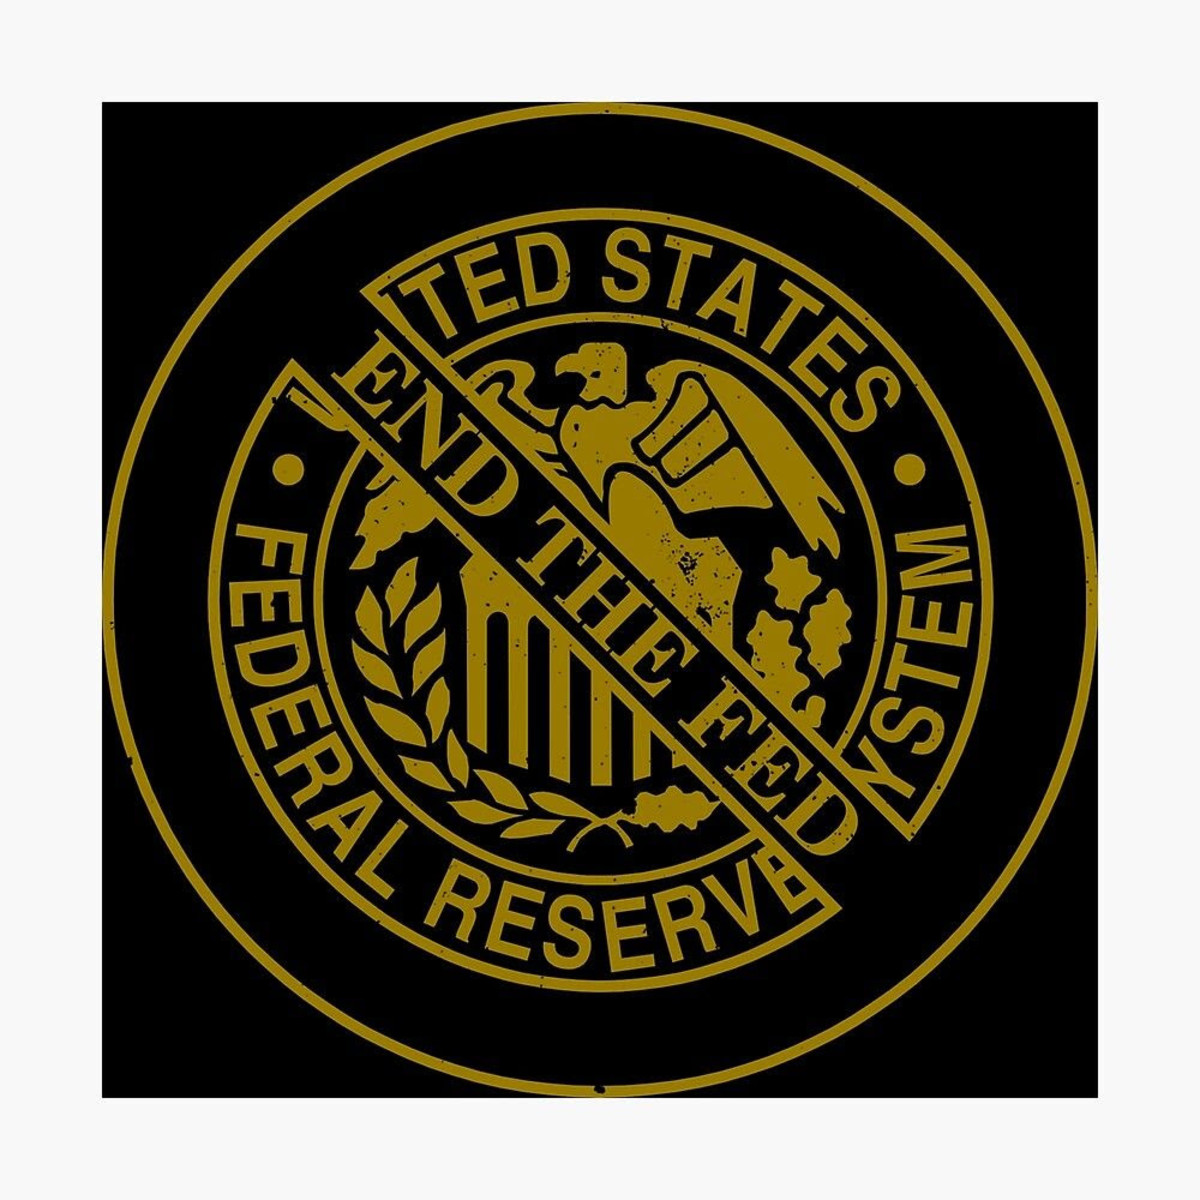 The Federal Reserve’s poor central planning has wrecked the global economy and they are somehow expected to solve their own mess. Bitcoin fixes this.